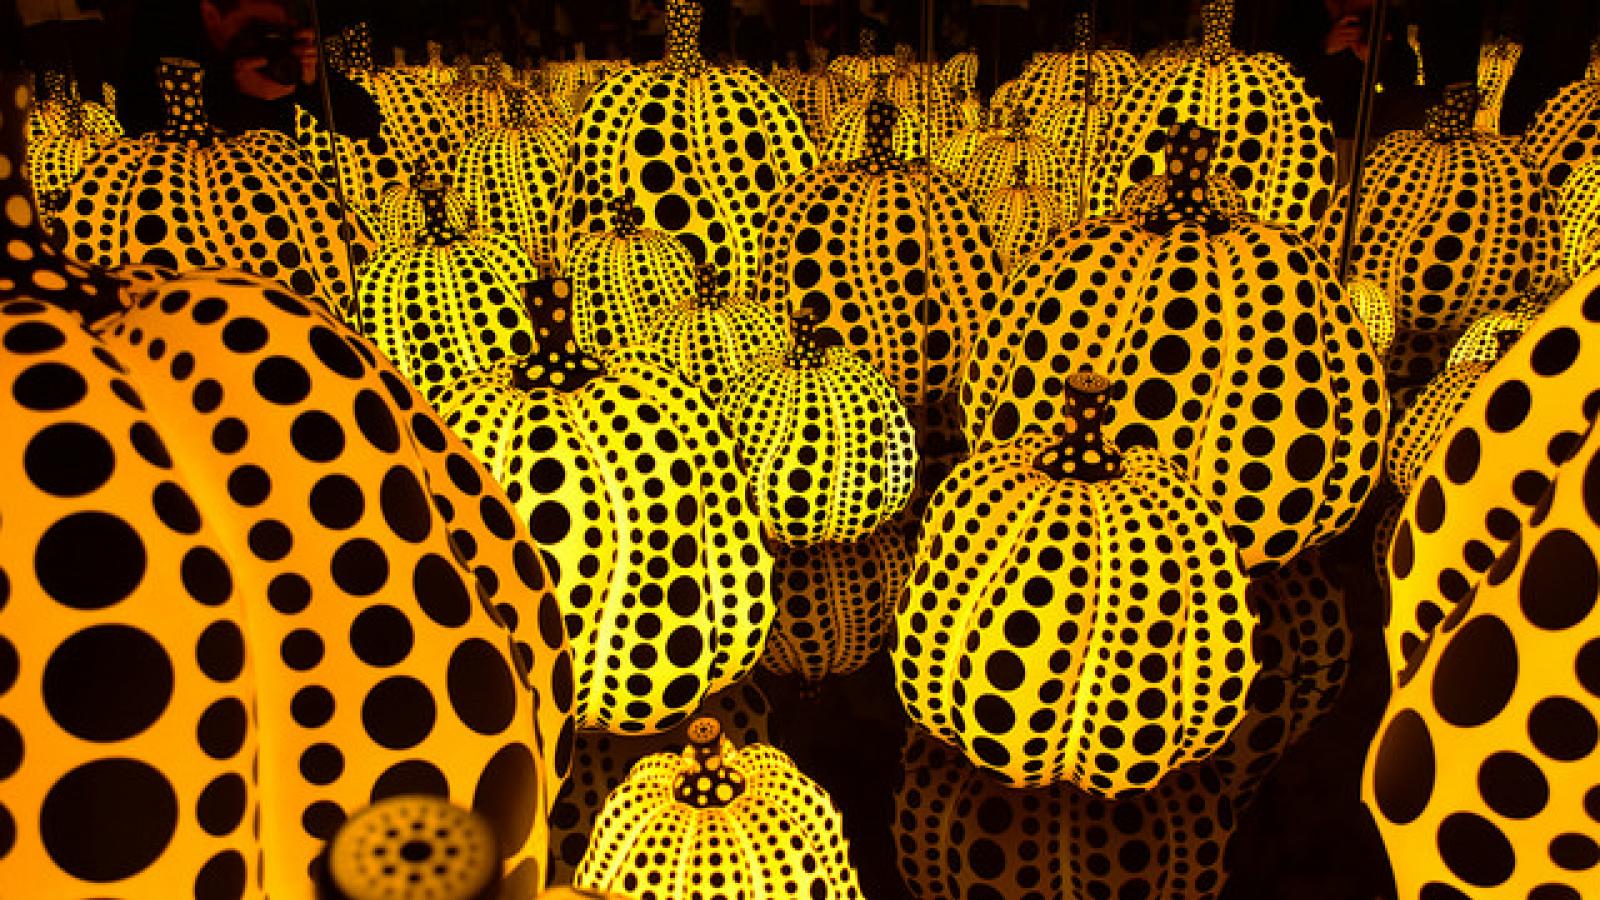 Rows of yellow glowing glass pumpkins covered with black polka dots